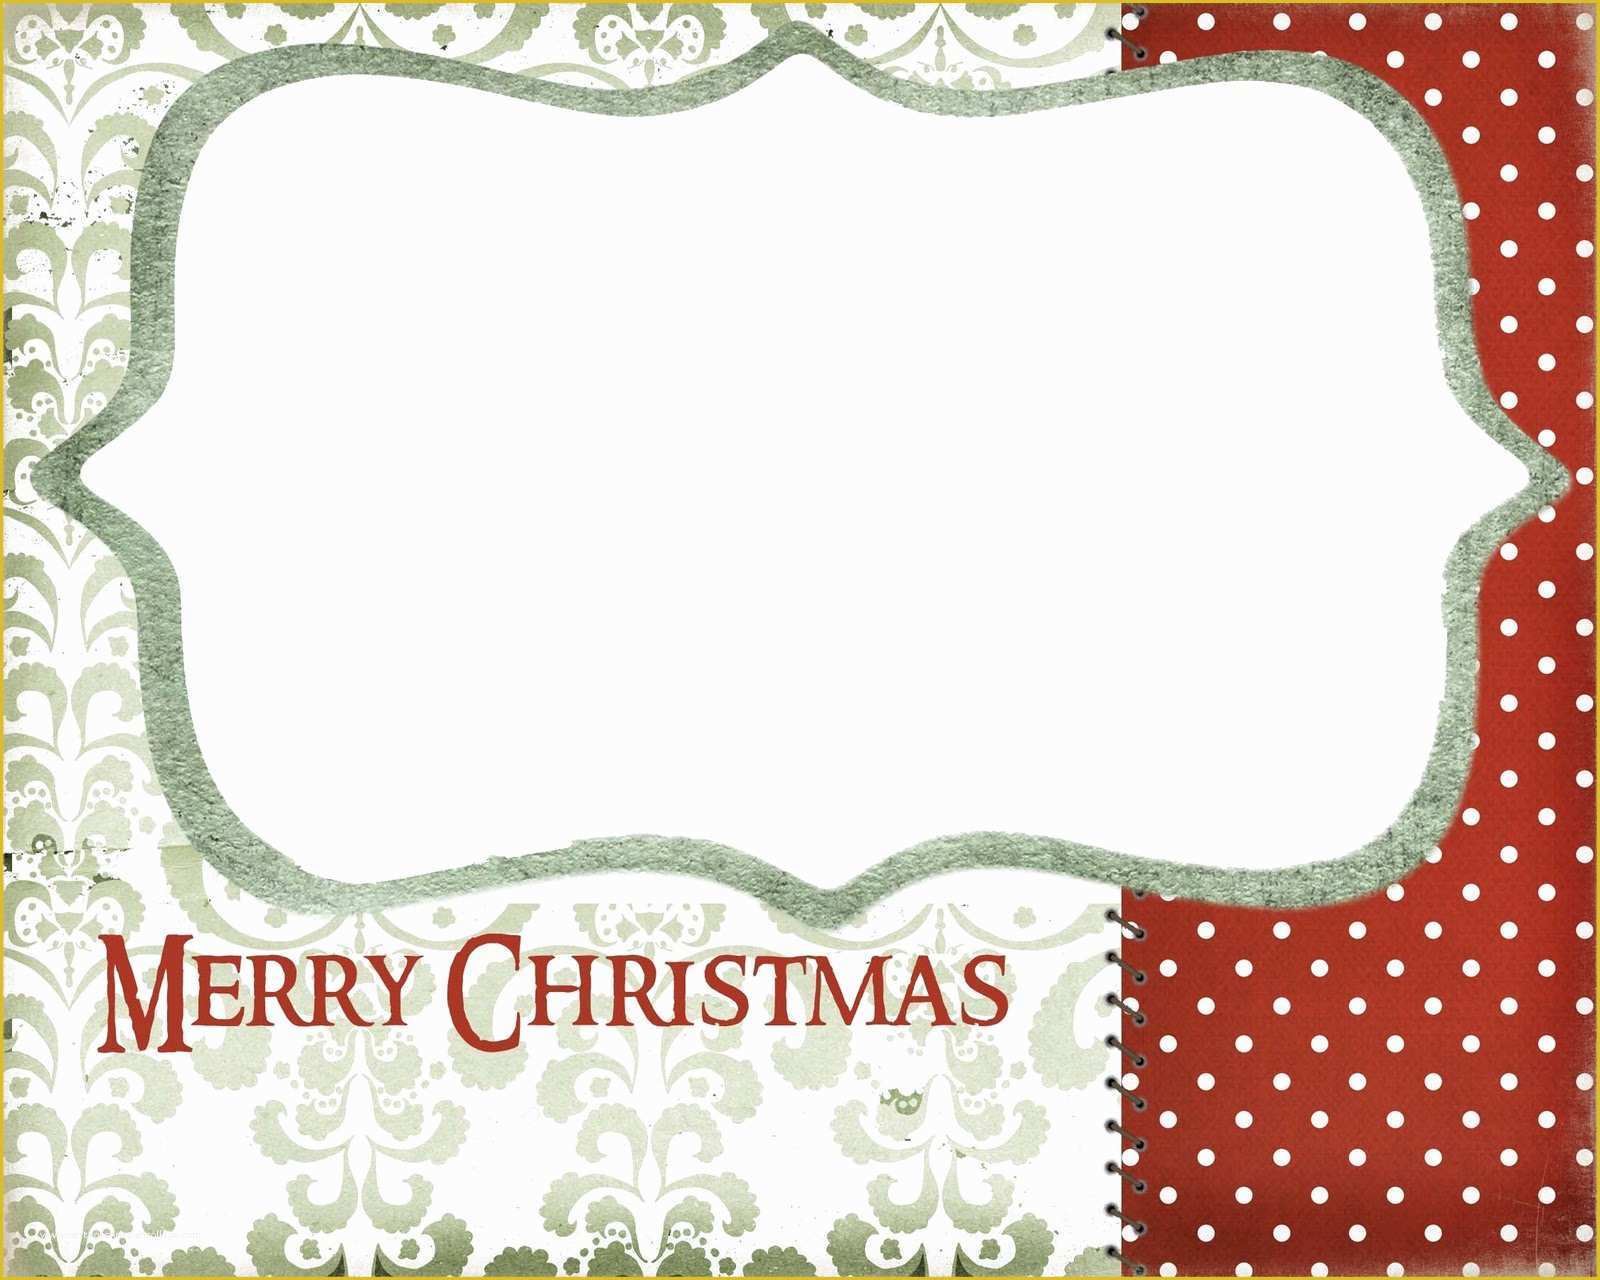 Christmas Card Print Templates Free Of Lovely Little Snippets Christmas Card Display and 5 Free